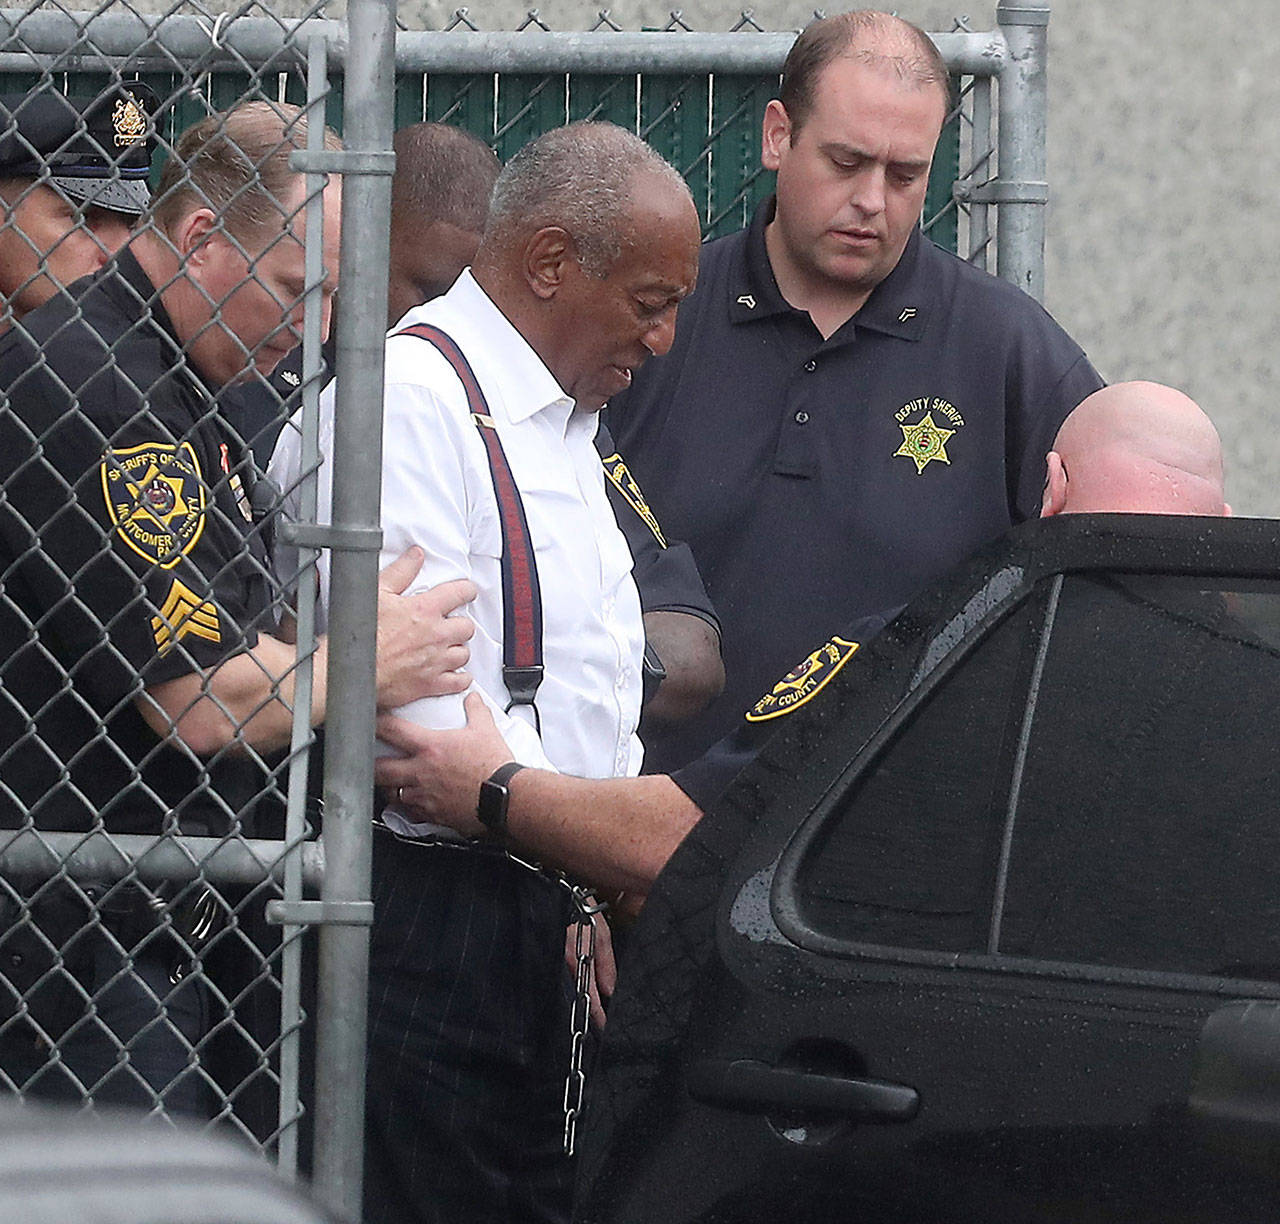 Entertainer Bill Cosby is escorted out in shackles from the Montgomery County courthouse in Norristown, Penn., on Tuesday. Cosby was sentenced to three to 10 years in prison. (David Maialetti/Philadelphia Inquirer)